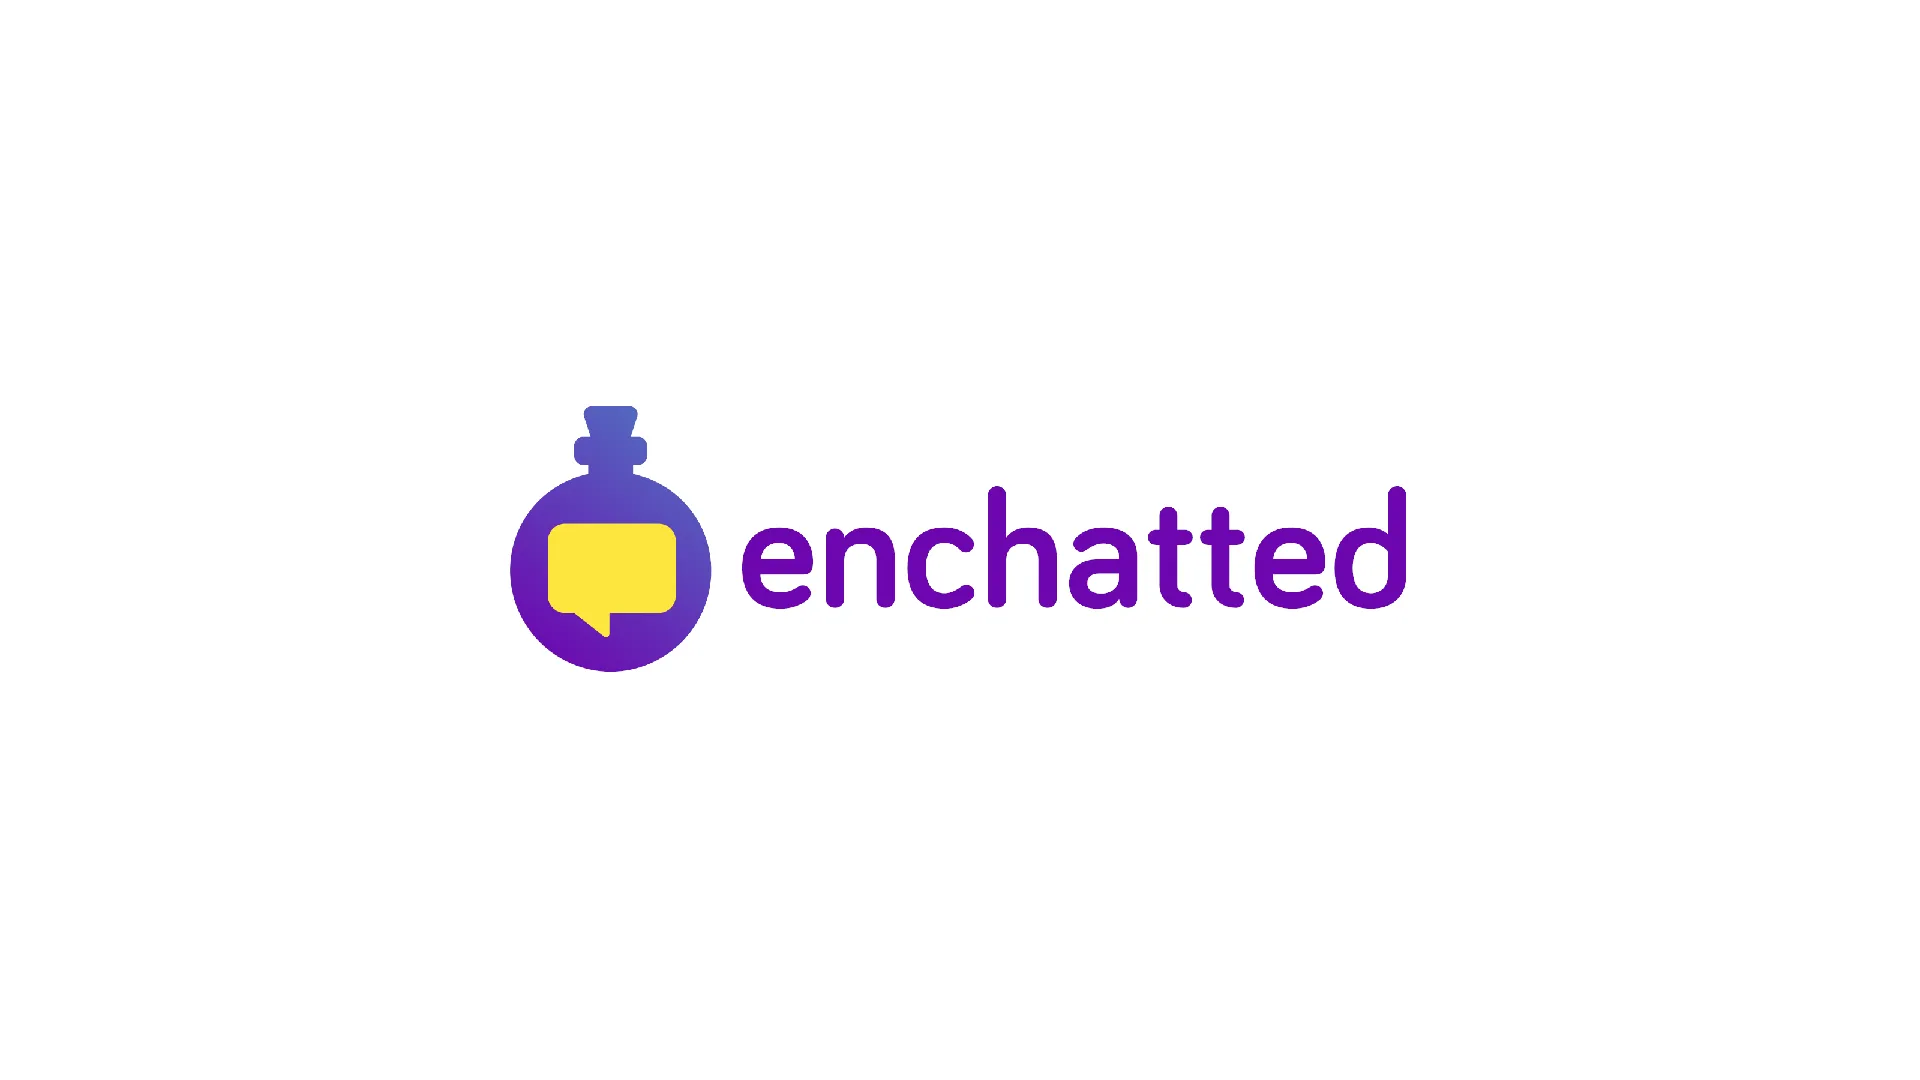 The Enchatted logo